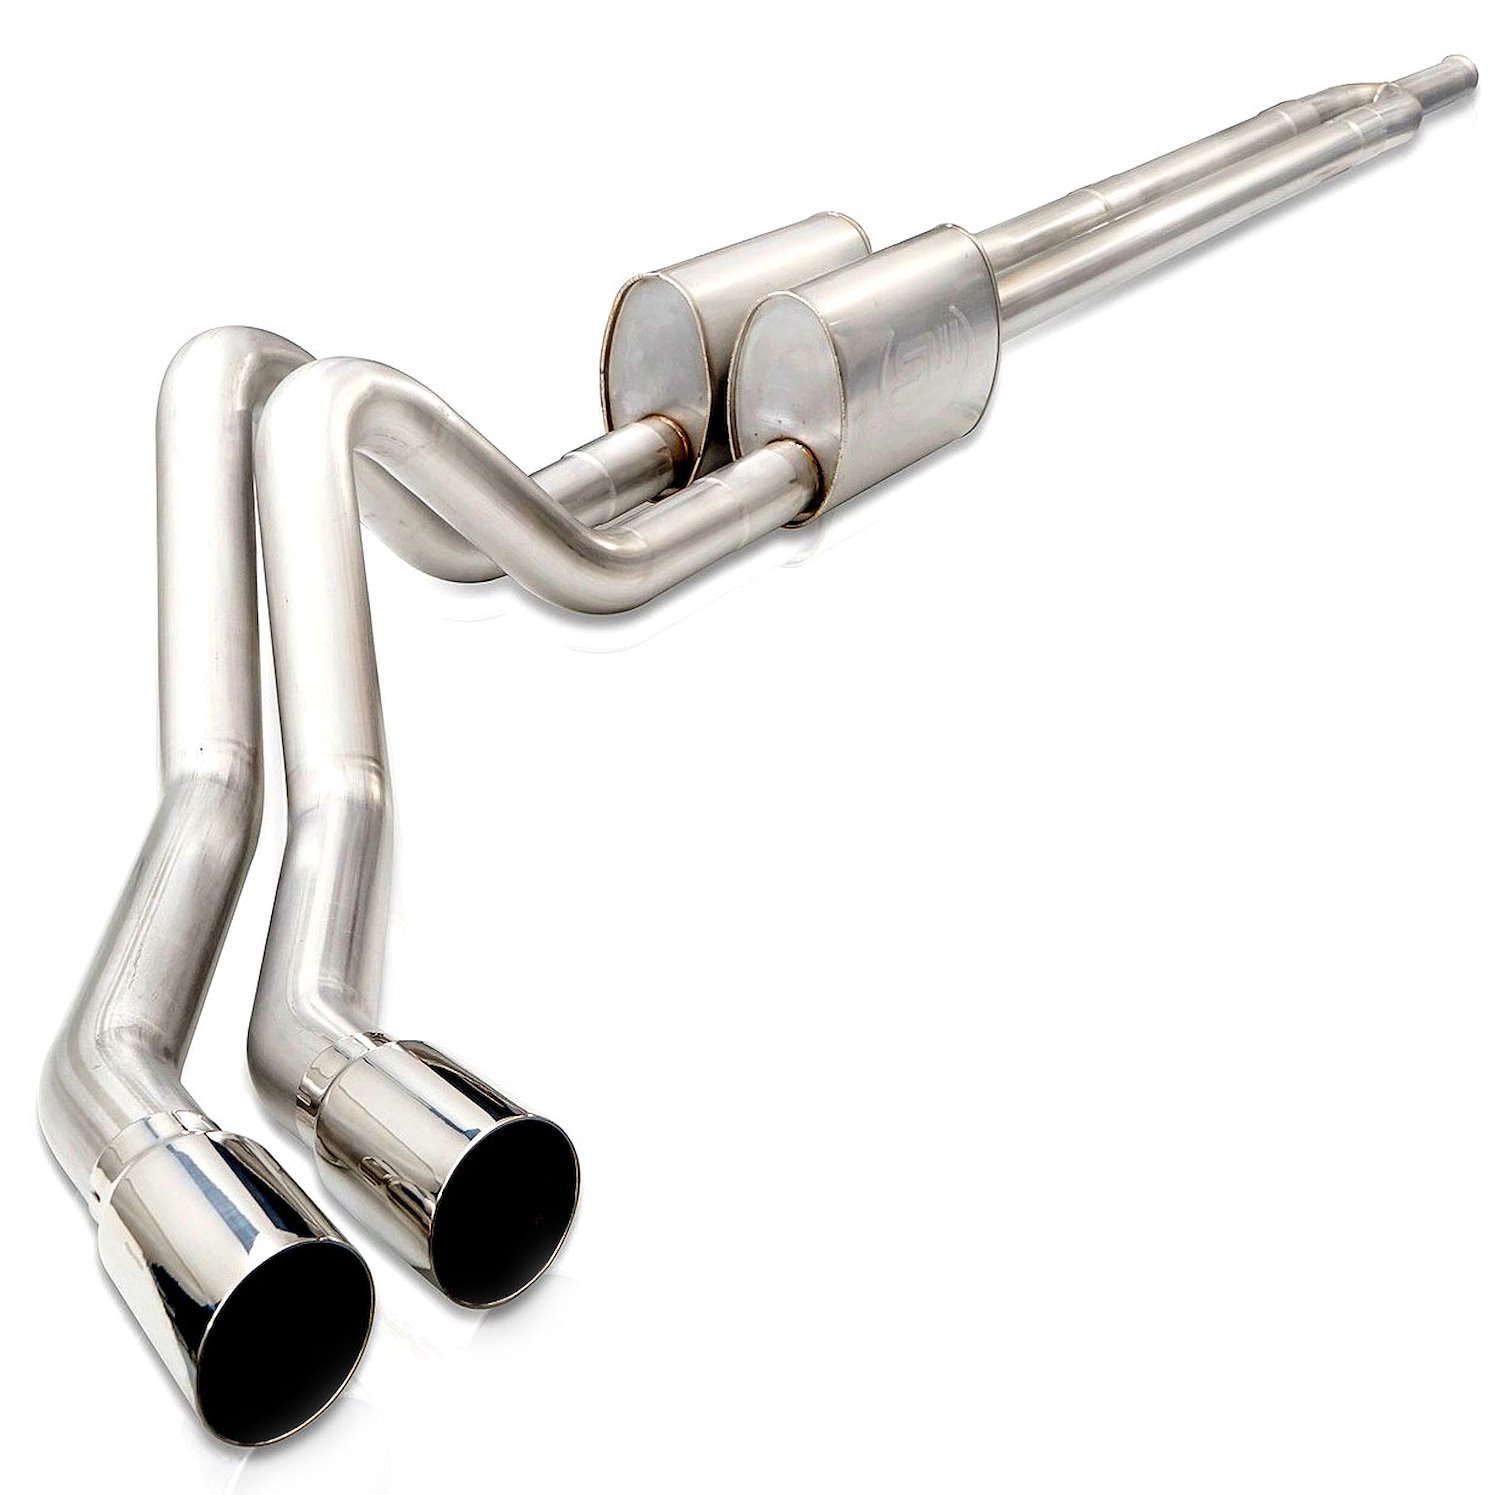 Legend Series Cat-Back Exhaust System 2019 Silverado/Sierra 1500 5.3L - 4 in. Polished Tips - Distinctive Growl/Rumble